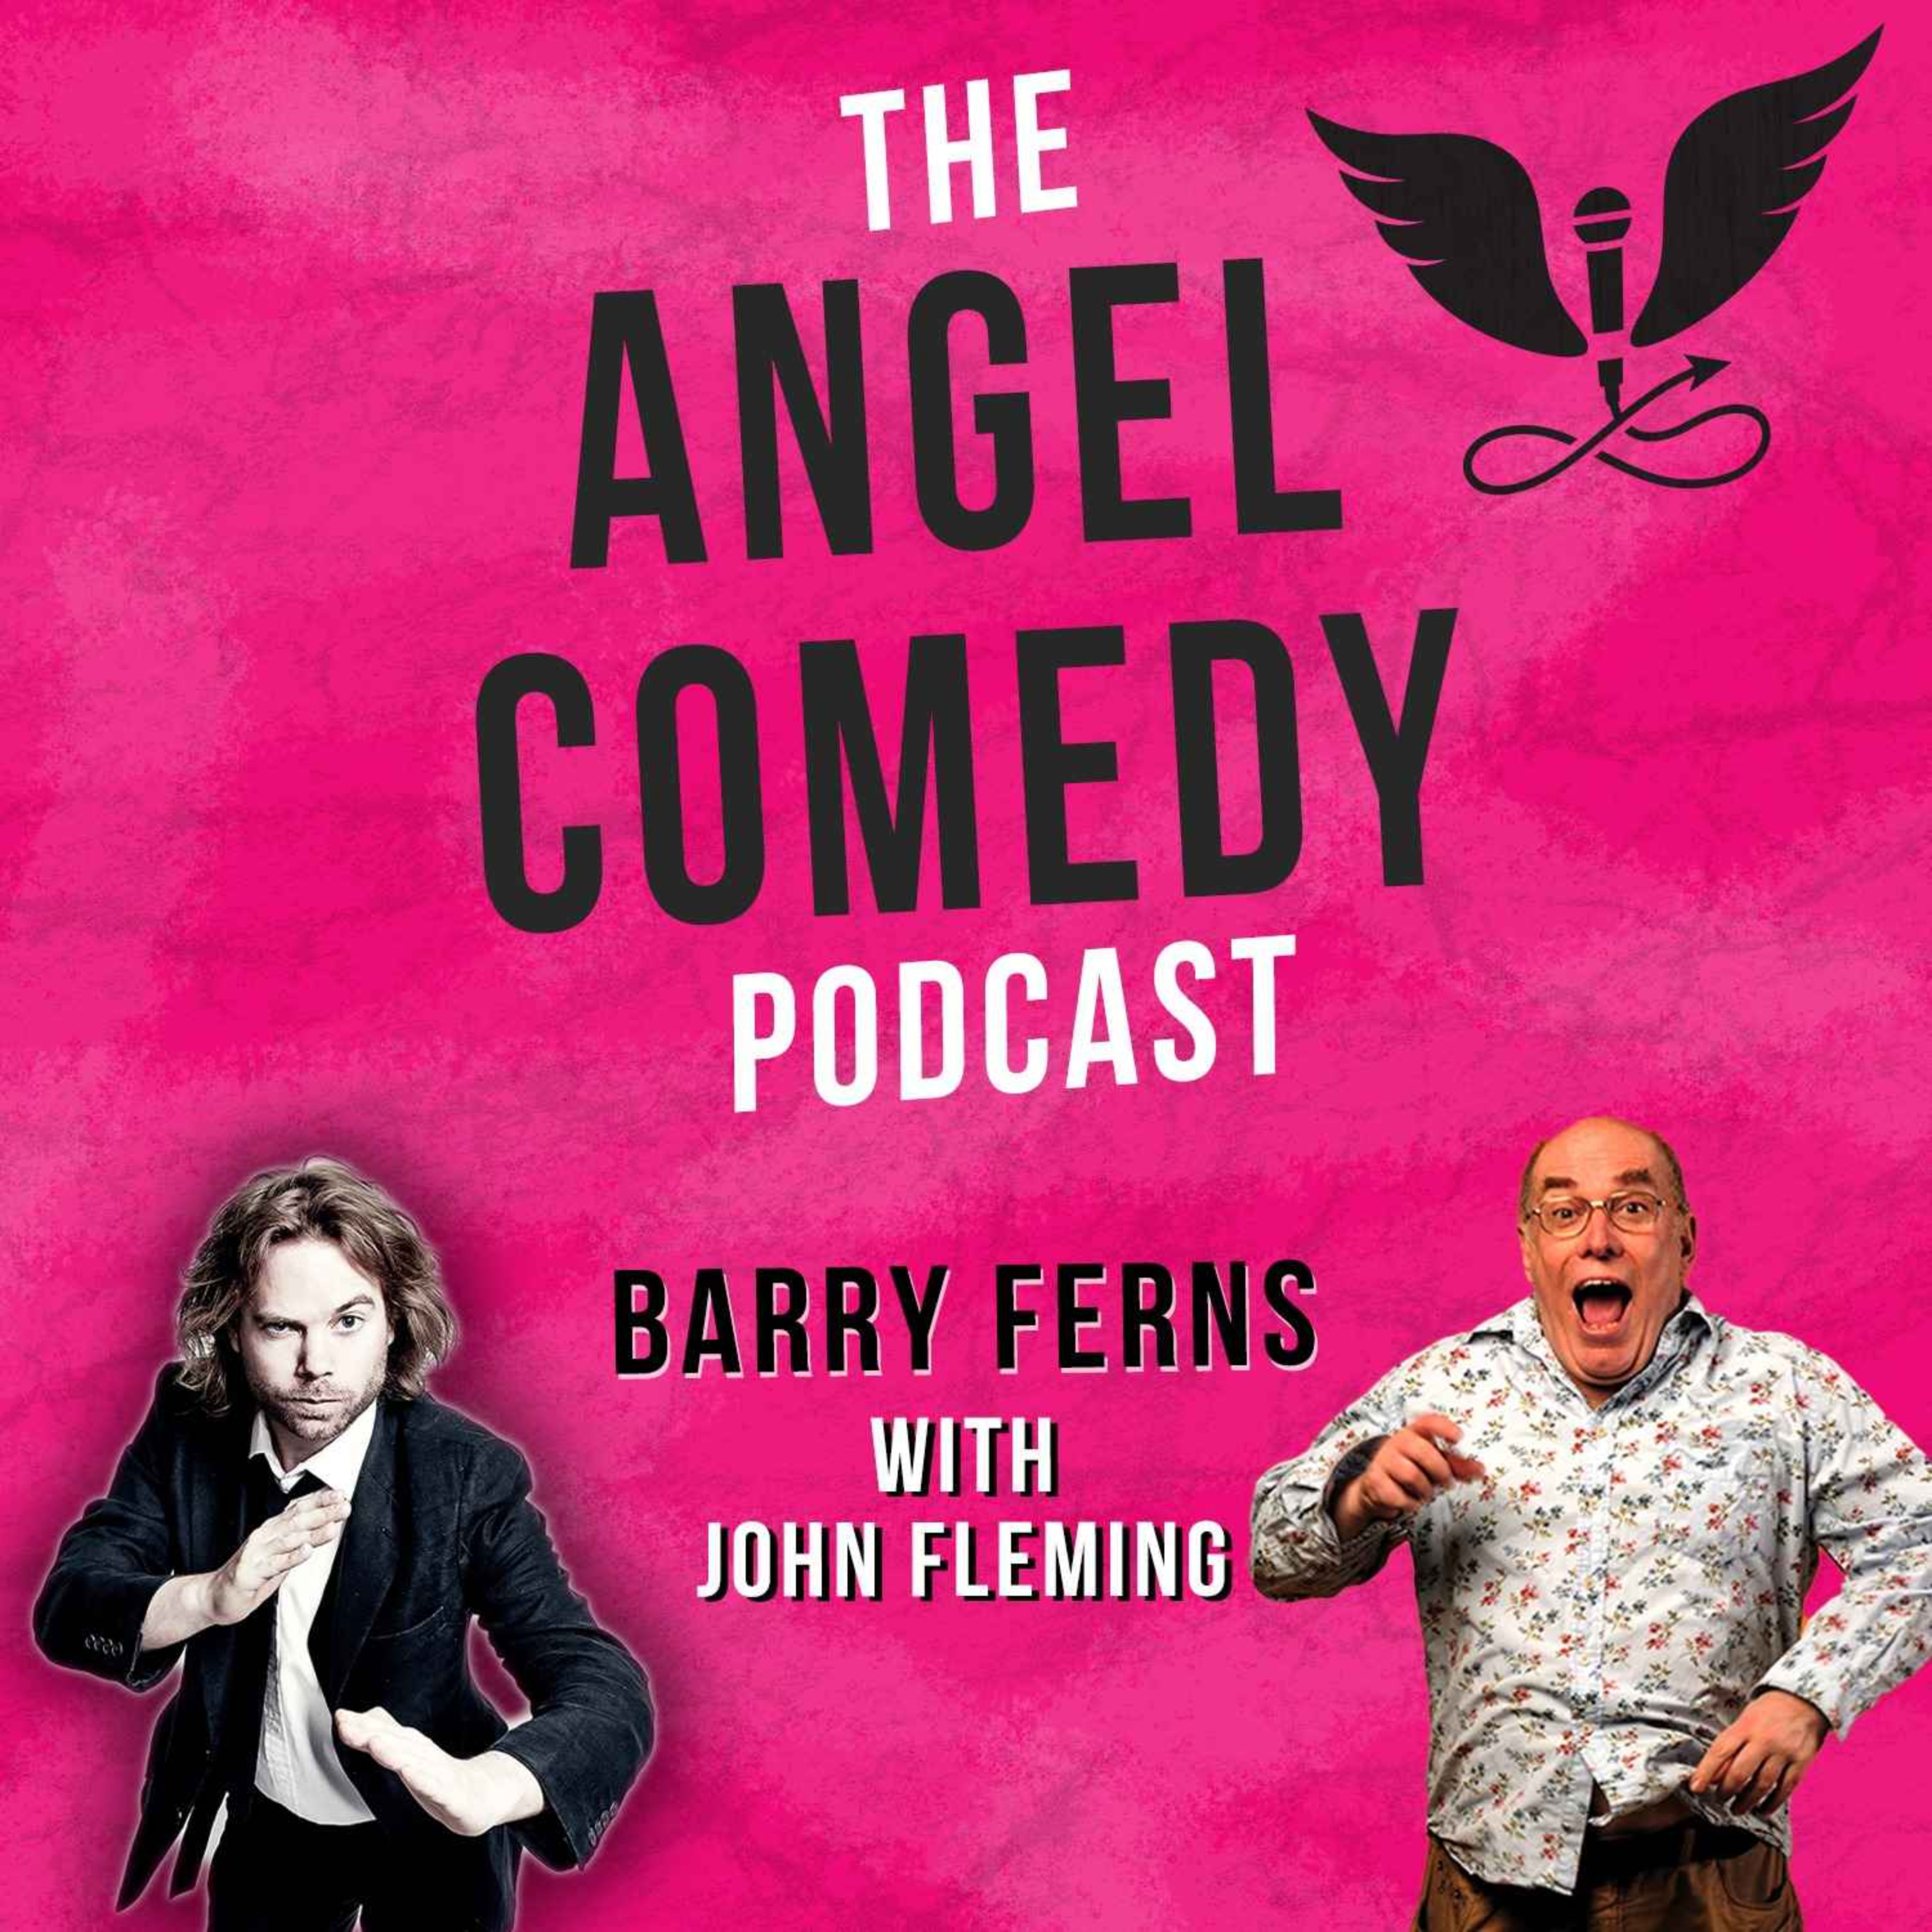 Podcast: The Angel Comedy Podcast with John Fleming - Angel Comedy